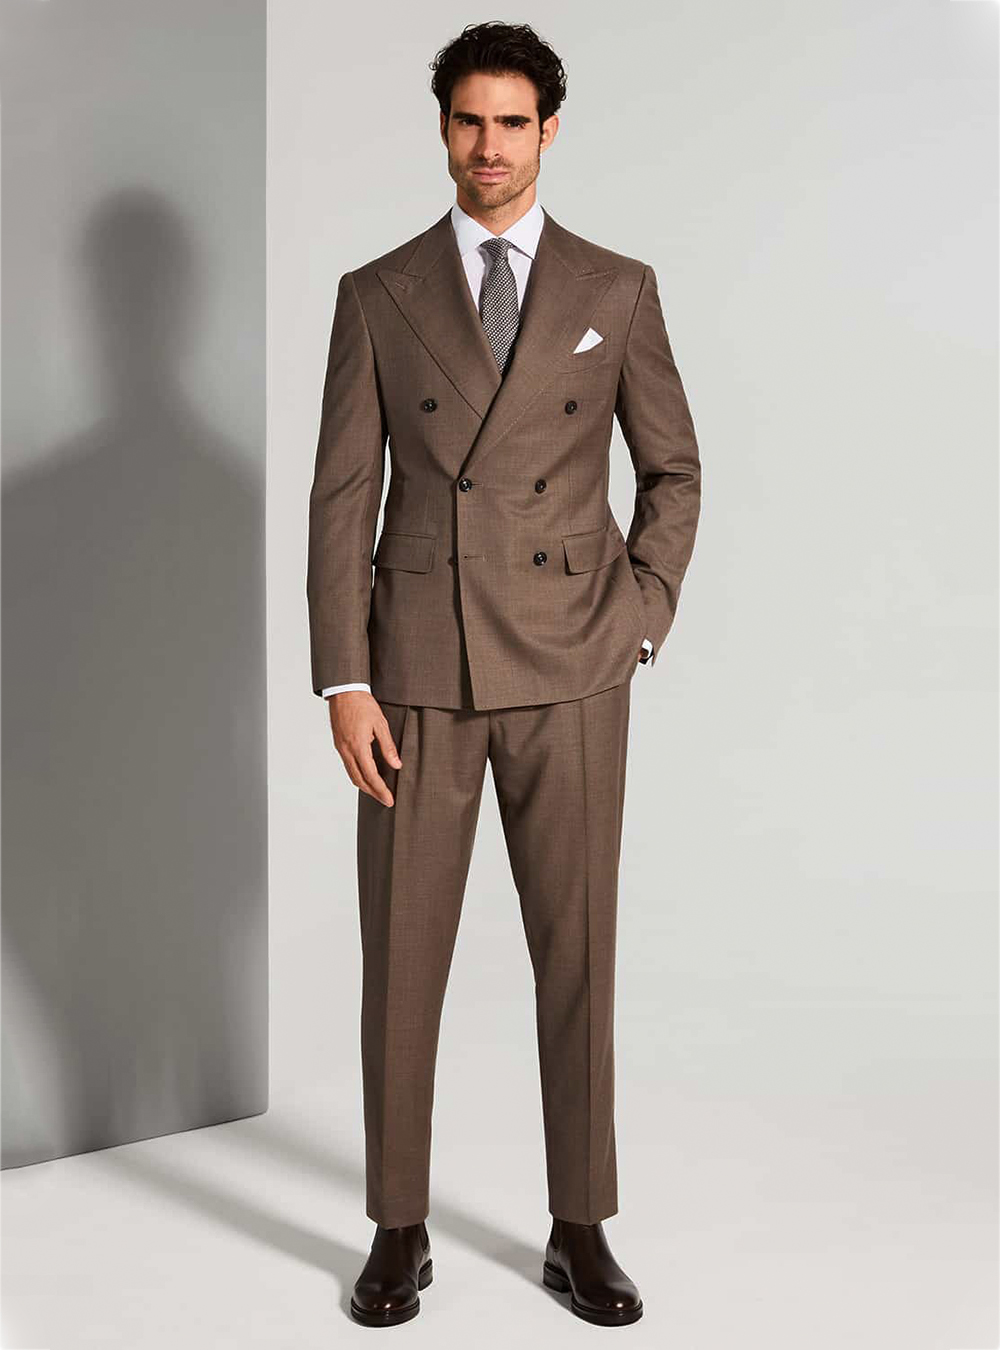 Brown double-breasted suit, white dress shirt, grey dotted tie and brown Chelsea boots